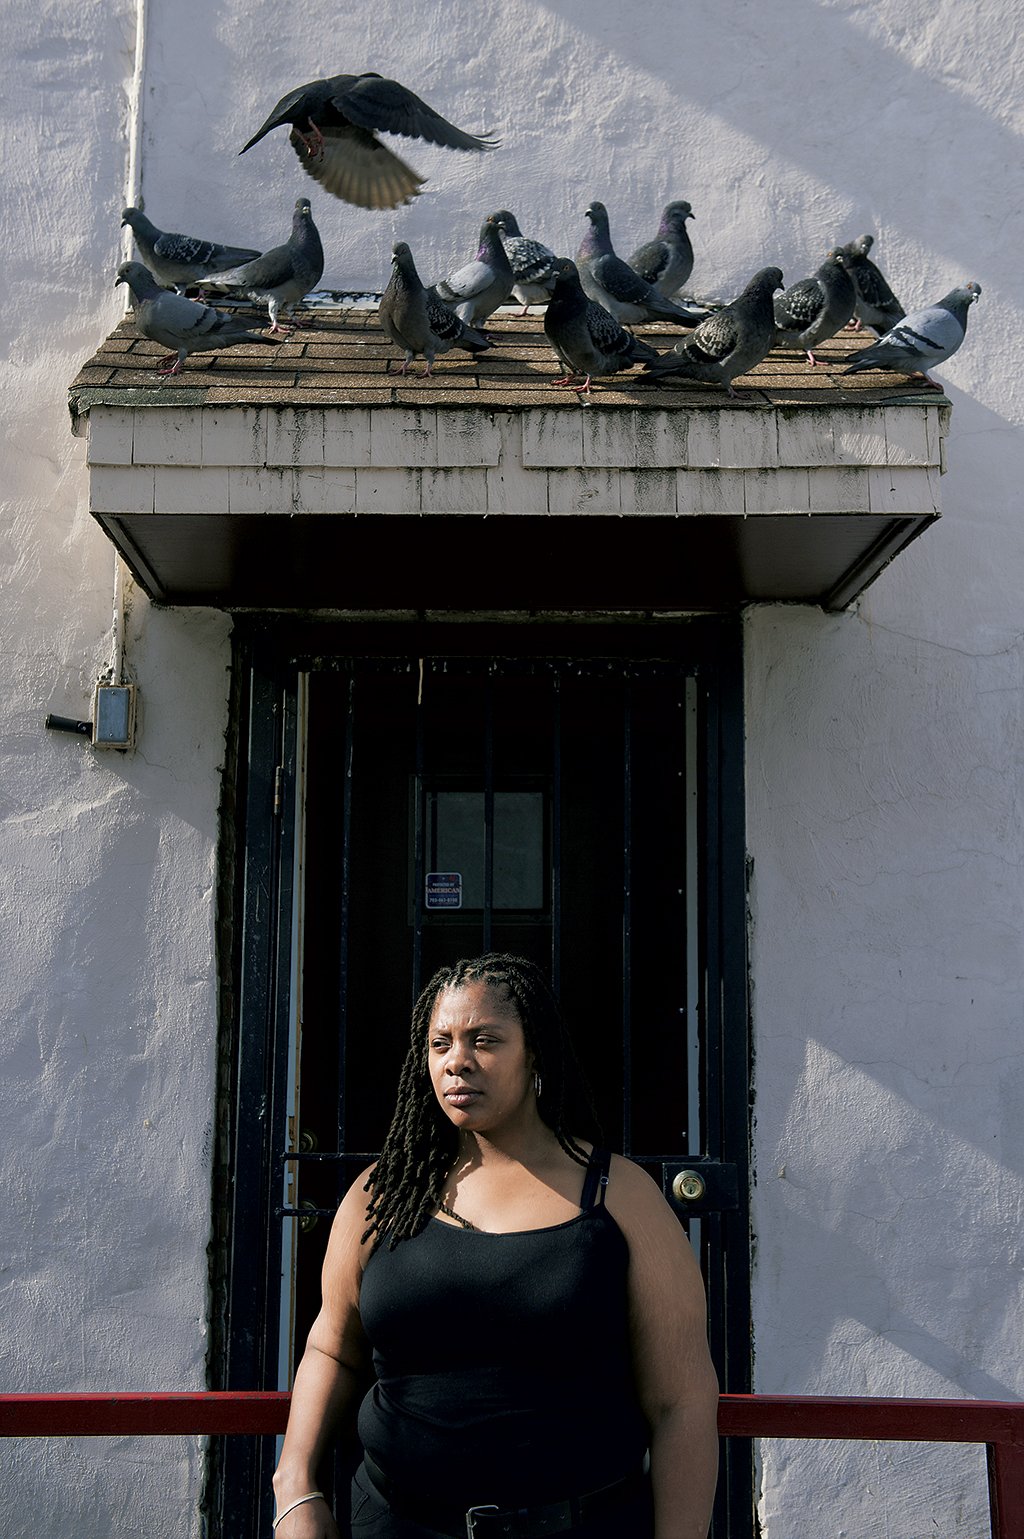 Inside our March 2016 issue: Charisma Brown fought her nonprofit landlord after it moved to evict her for having an alcohol bottle in her house. She says she was using it as a flower vase. Marisa Kashino takes a look into Brown's story, and how easy it is for programs battling homelessness to evict their tenants. Photograph by Swikar Patel.